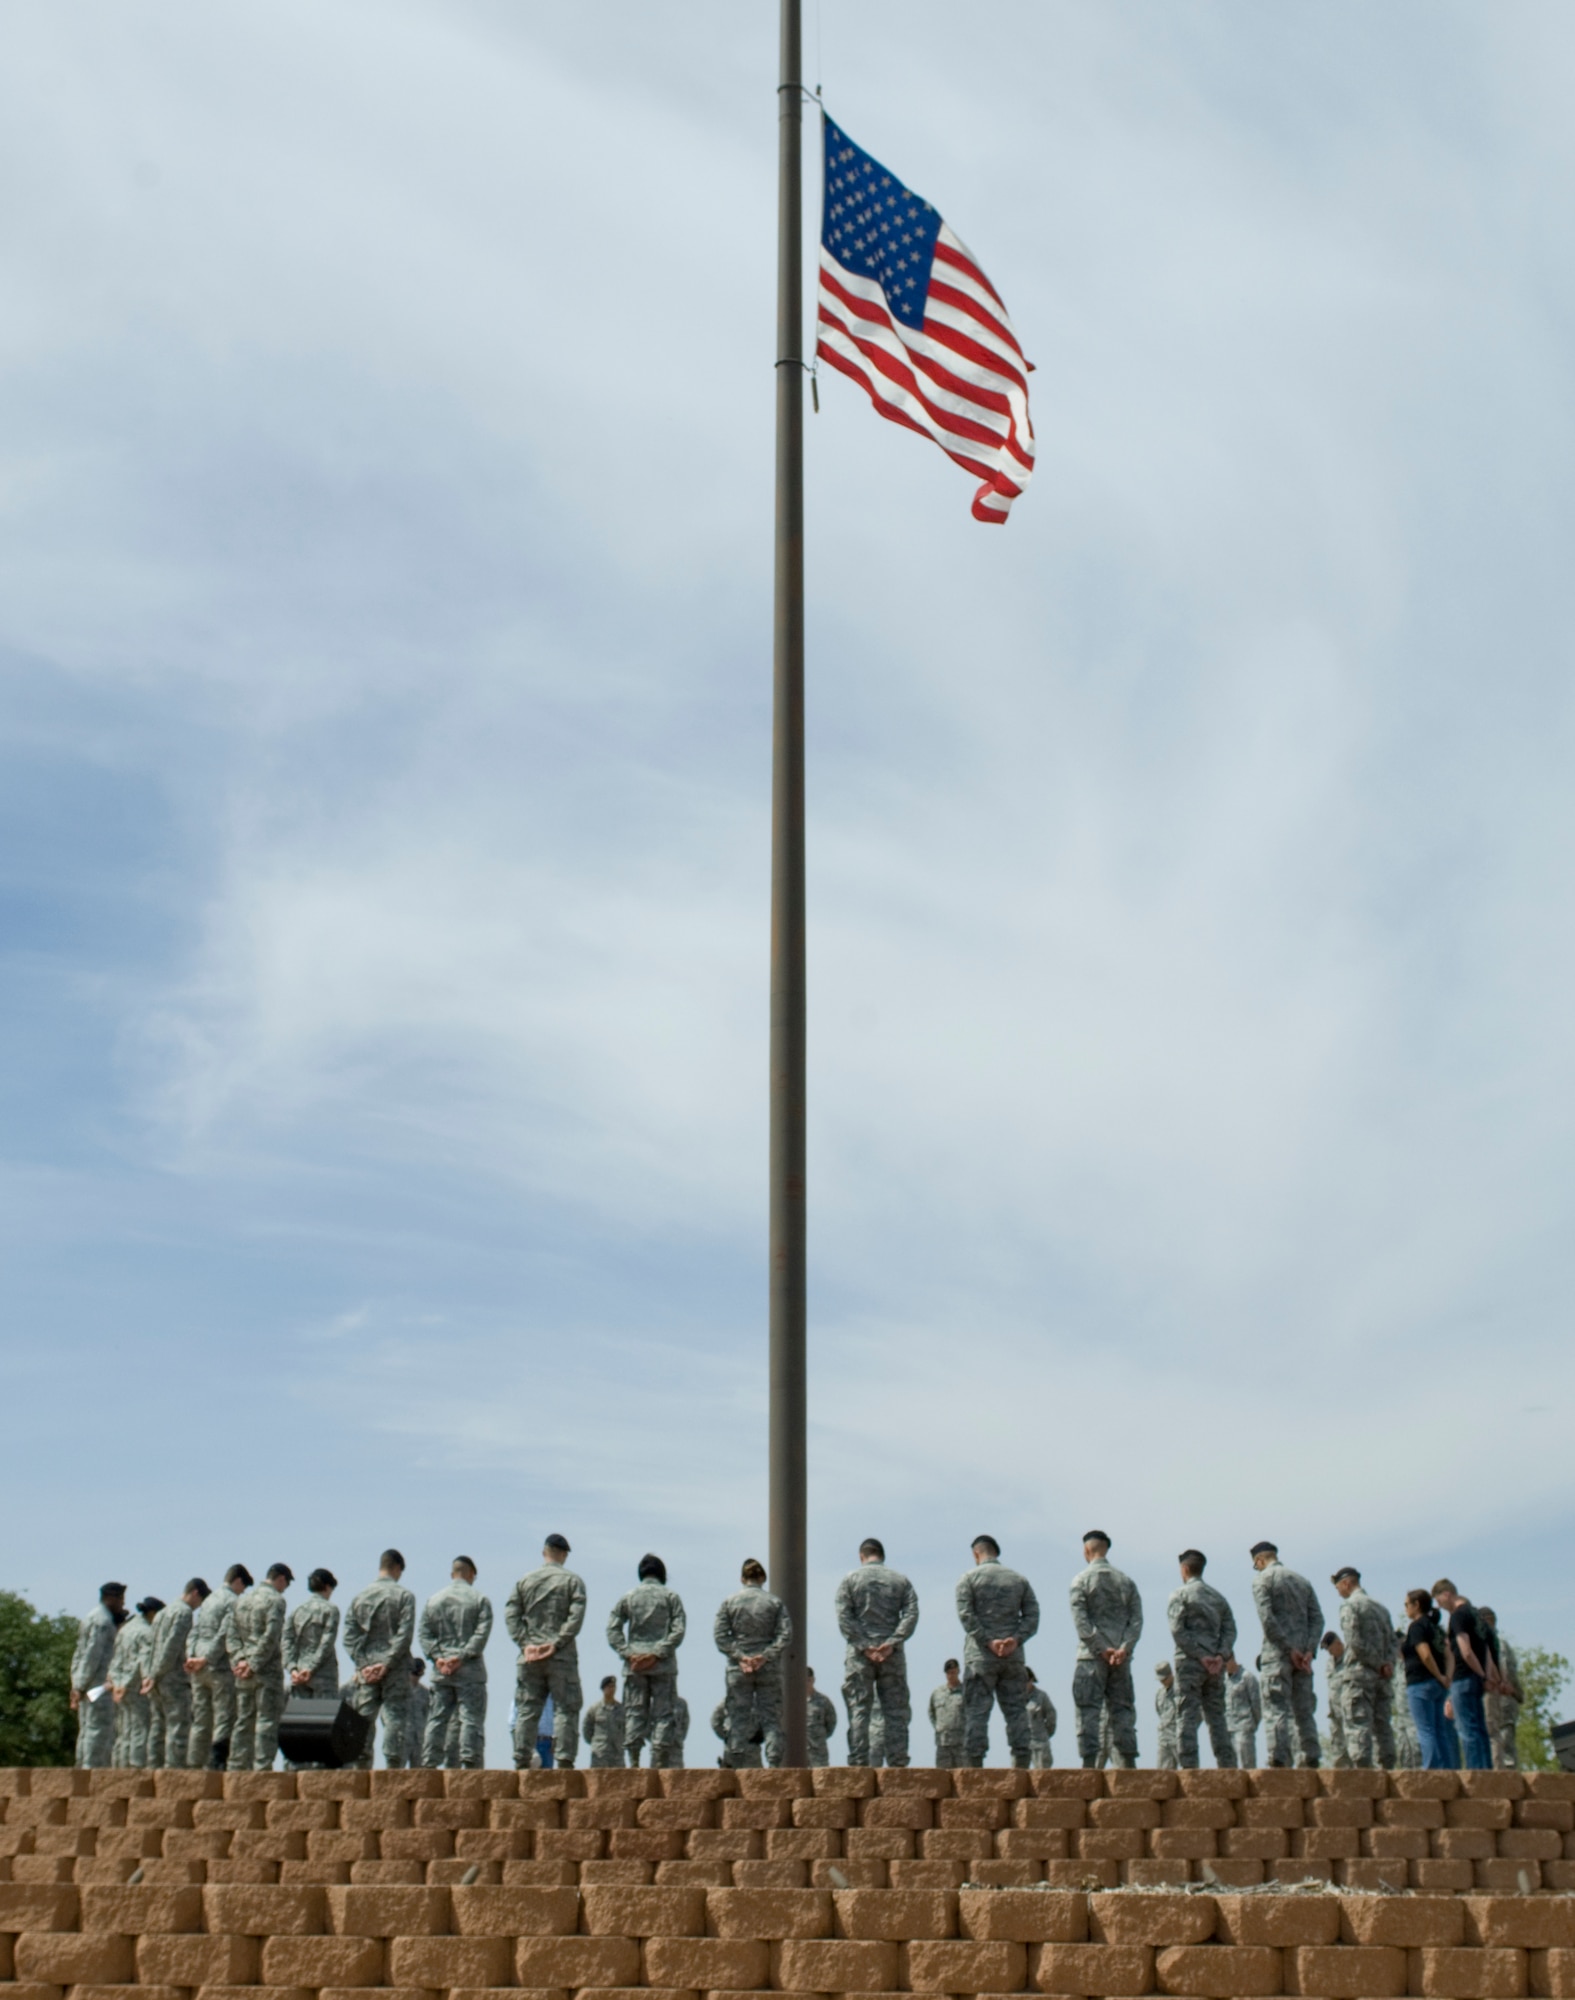 Airmen from the 7th Security Forces Squadron gather for a moment of silence around the flag pole May 16, 2014, at Dyess Air Force Base, Texas. The moment of silence was held during National Police Week to honor fallen law enforcement officers and fellow Airmen who have given their lives in the line of duty. (U.S. Air Force photo by Airman 1st Class Kylsee Wisseman/Released)